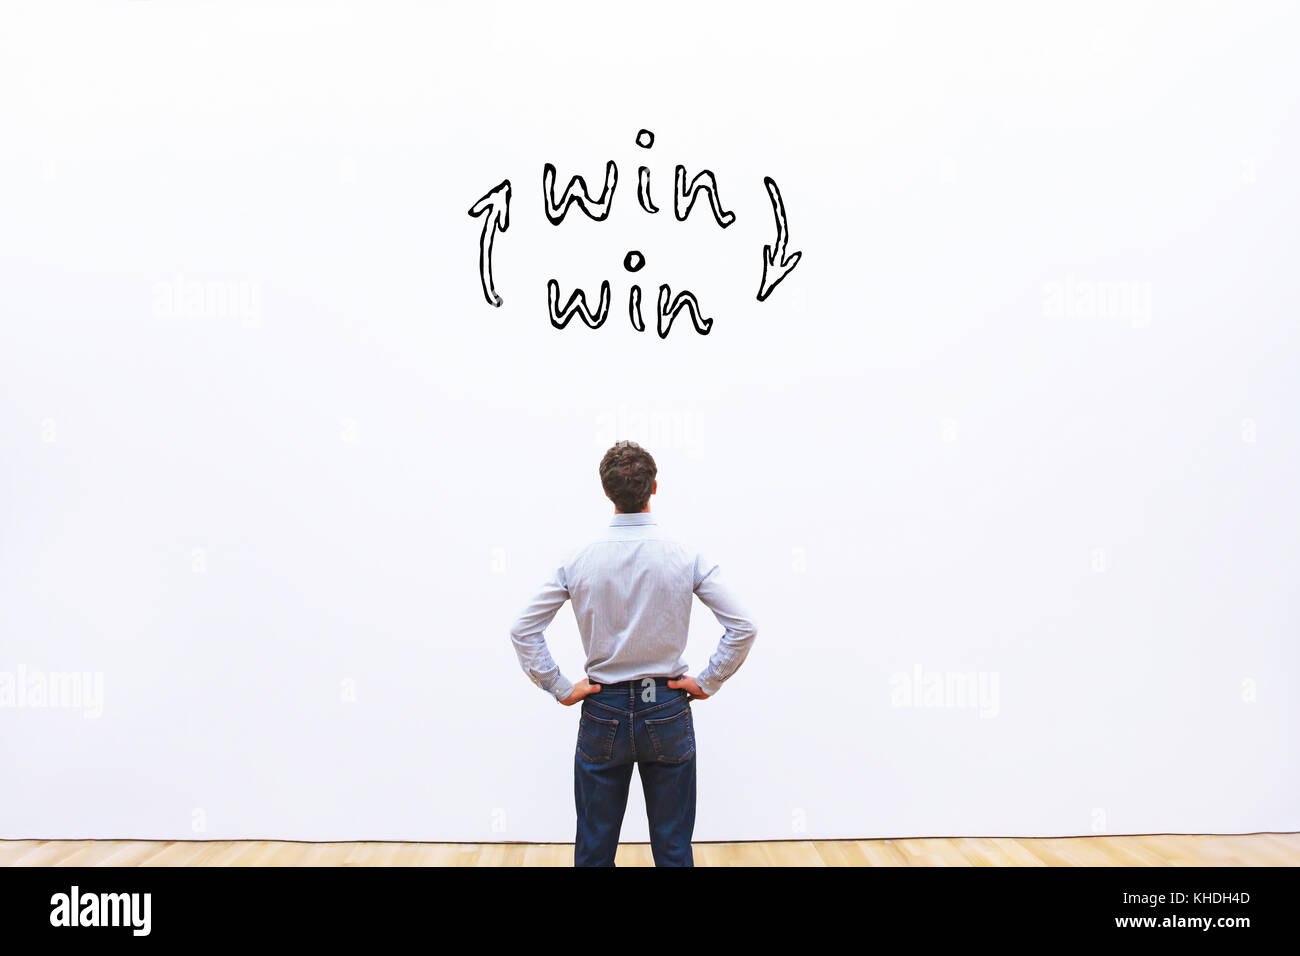 win-win concept, business man looking at win situation sign Stock Photo